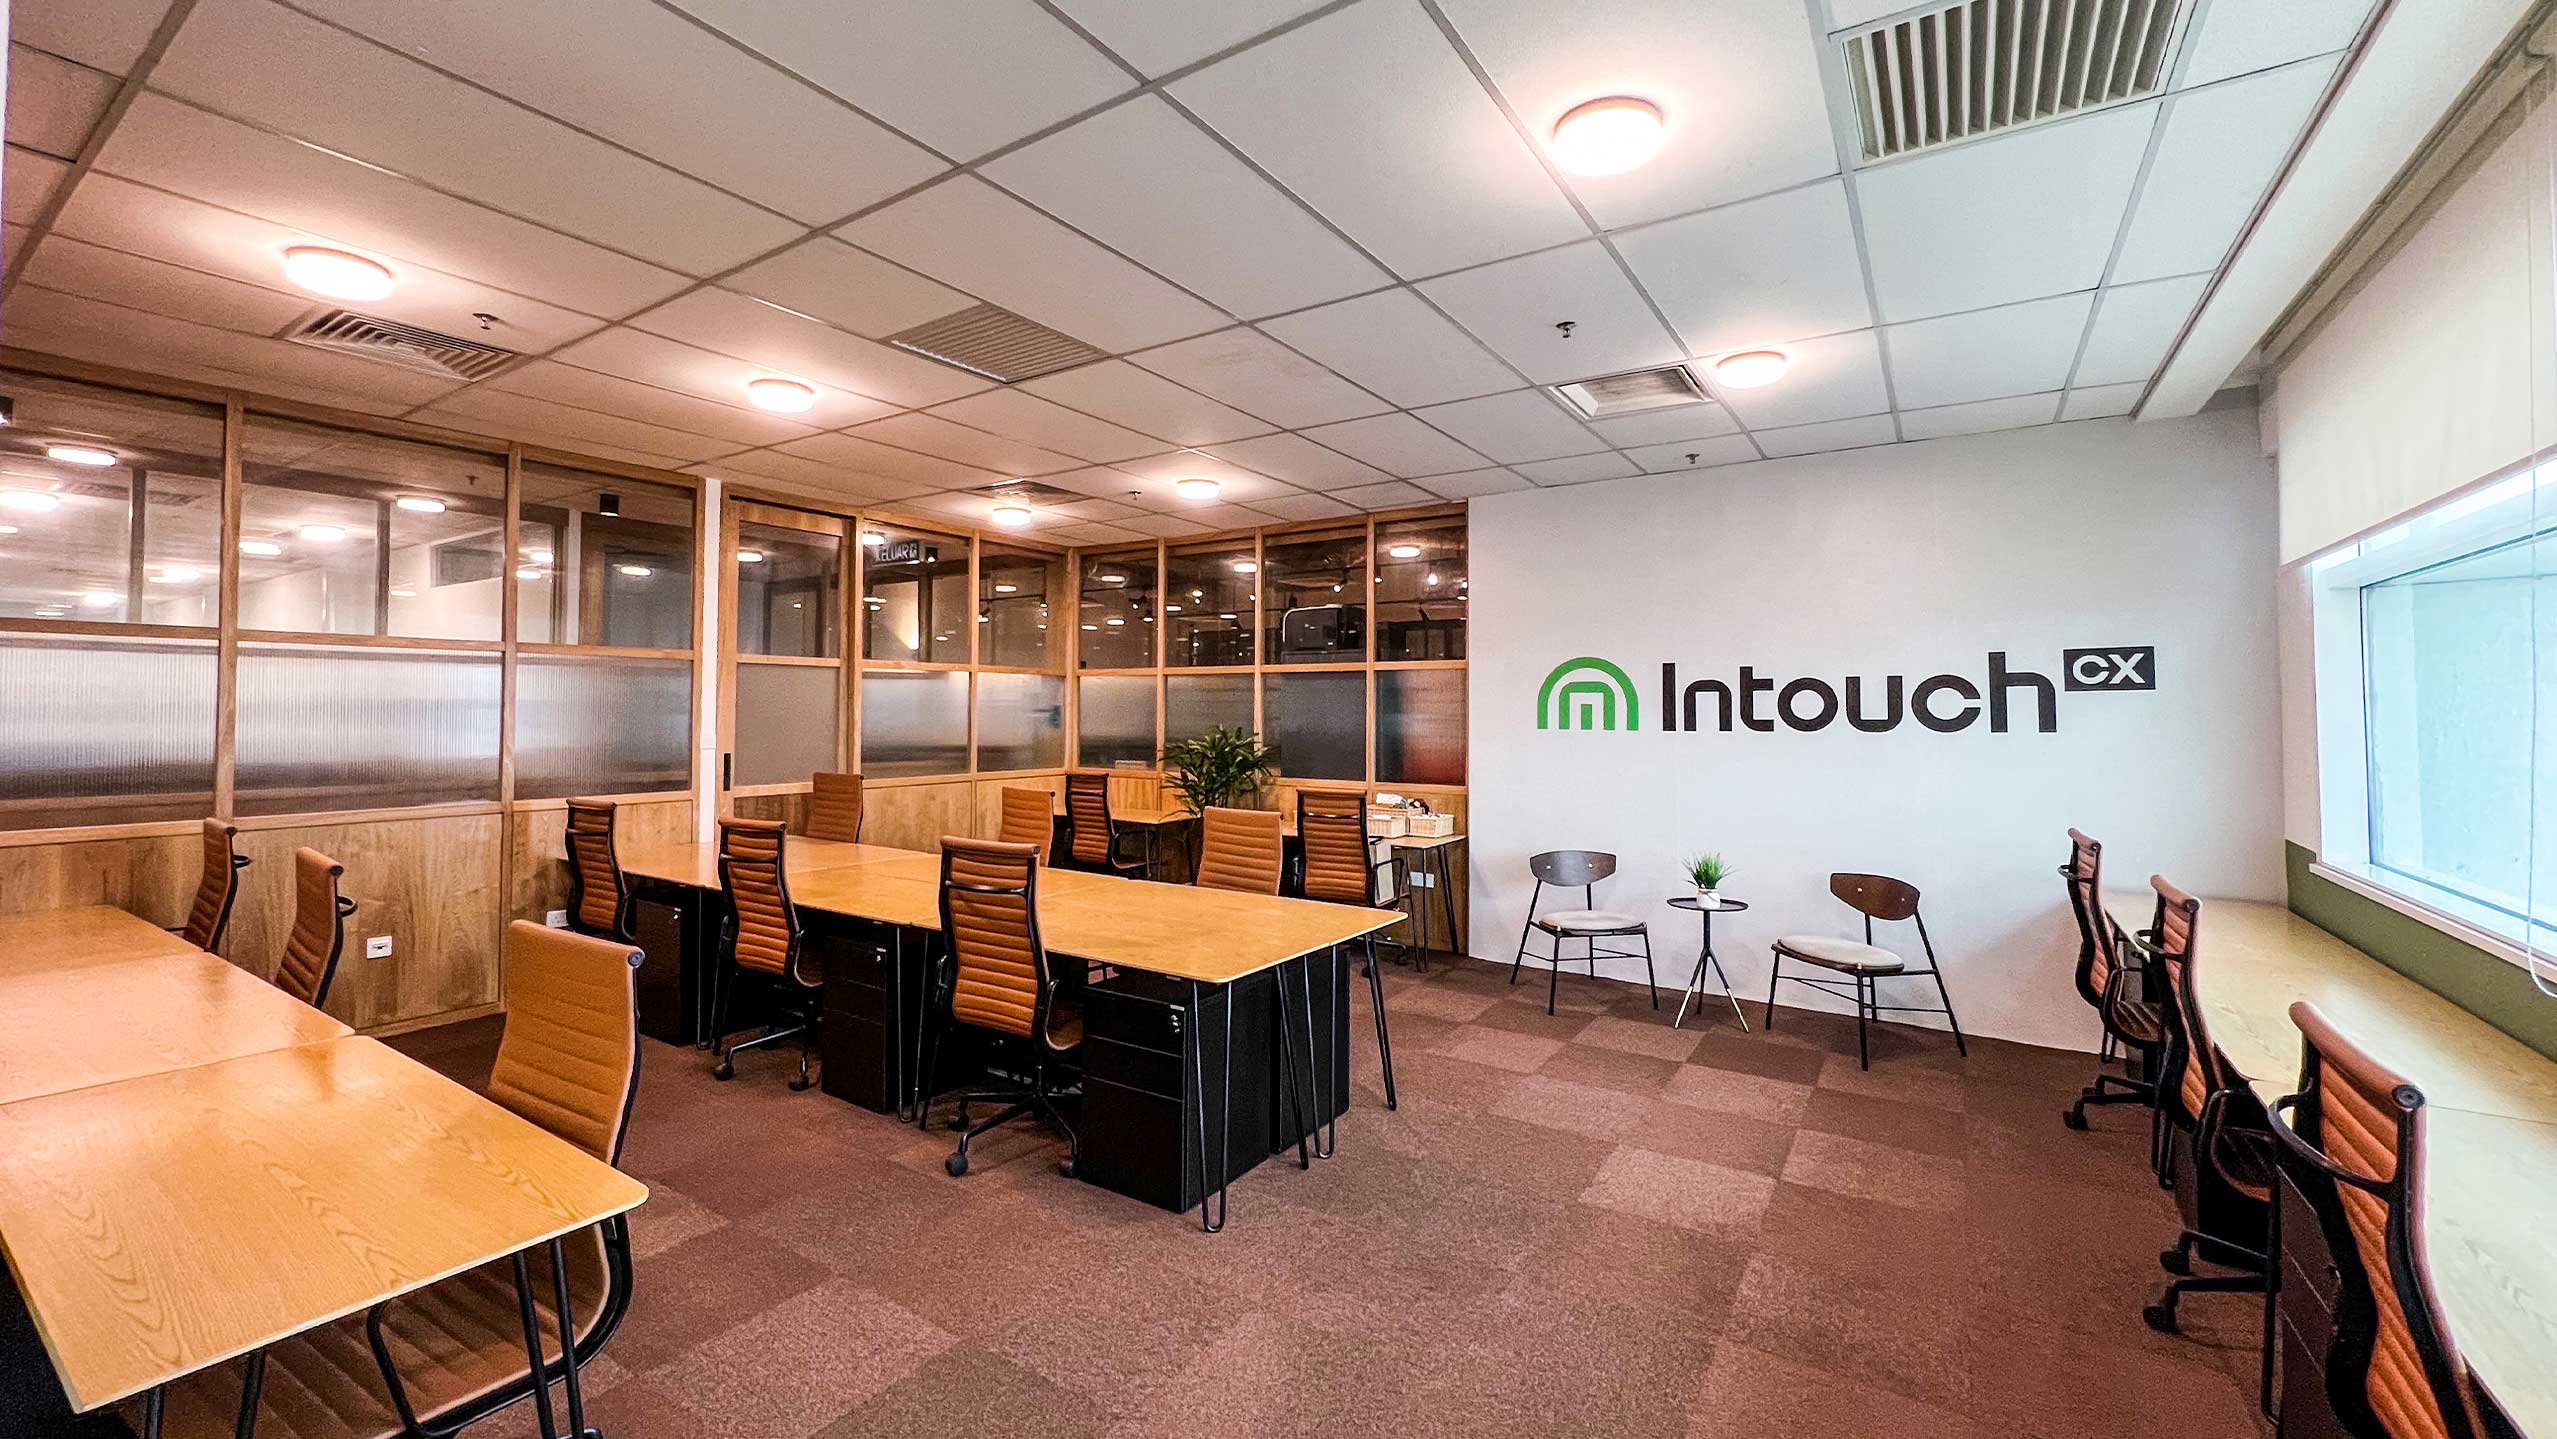 Photo of the working space at the IntouchCX campus in Kuala Lumpur